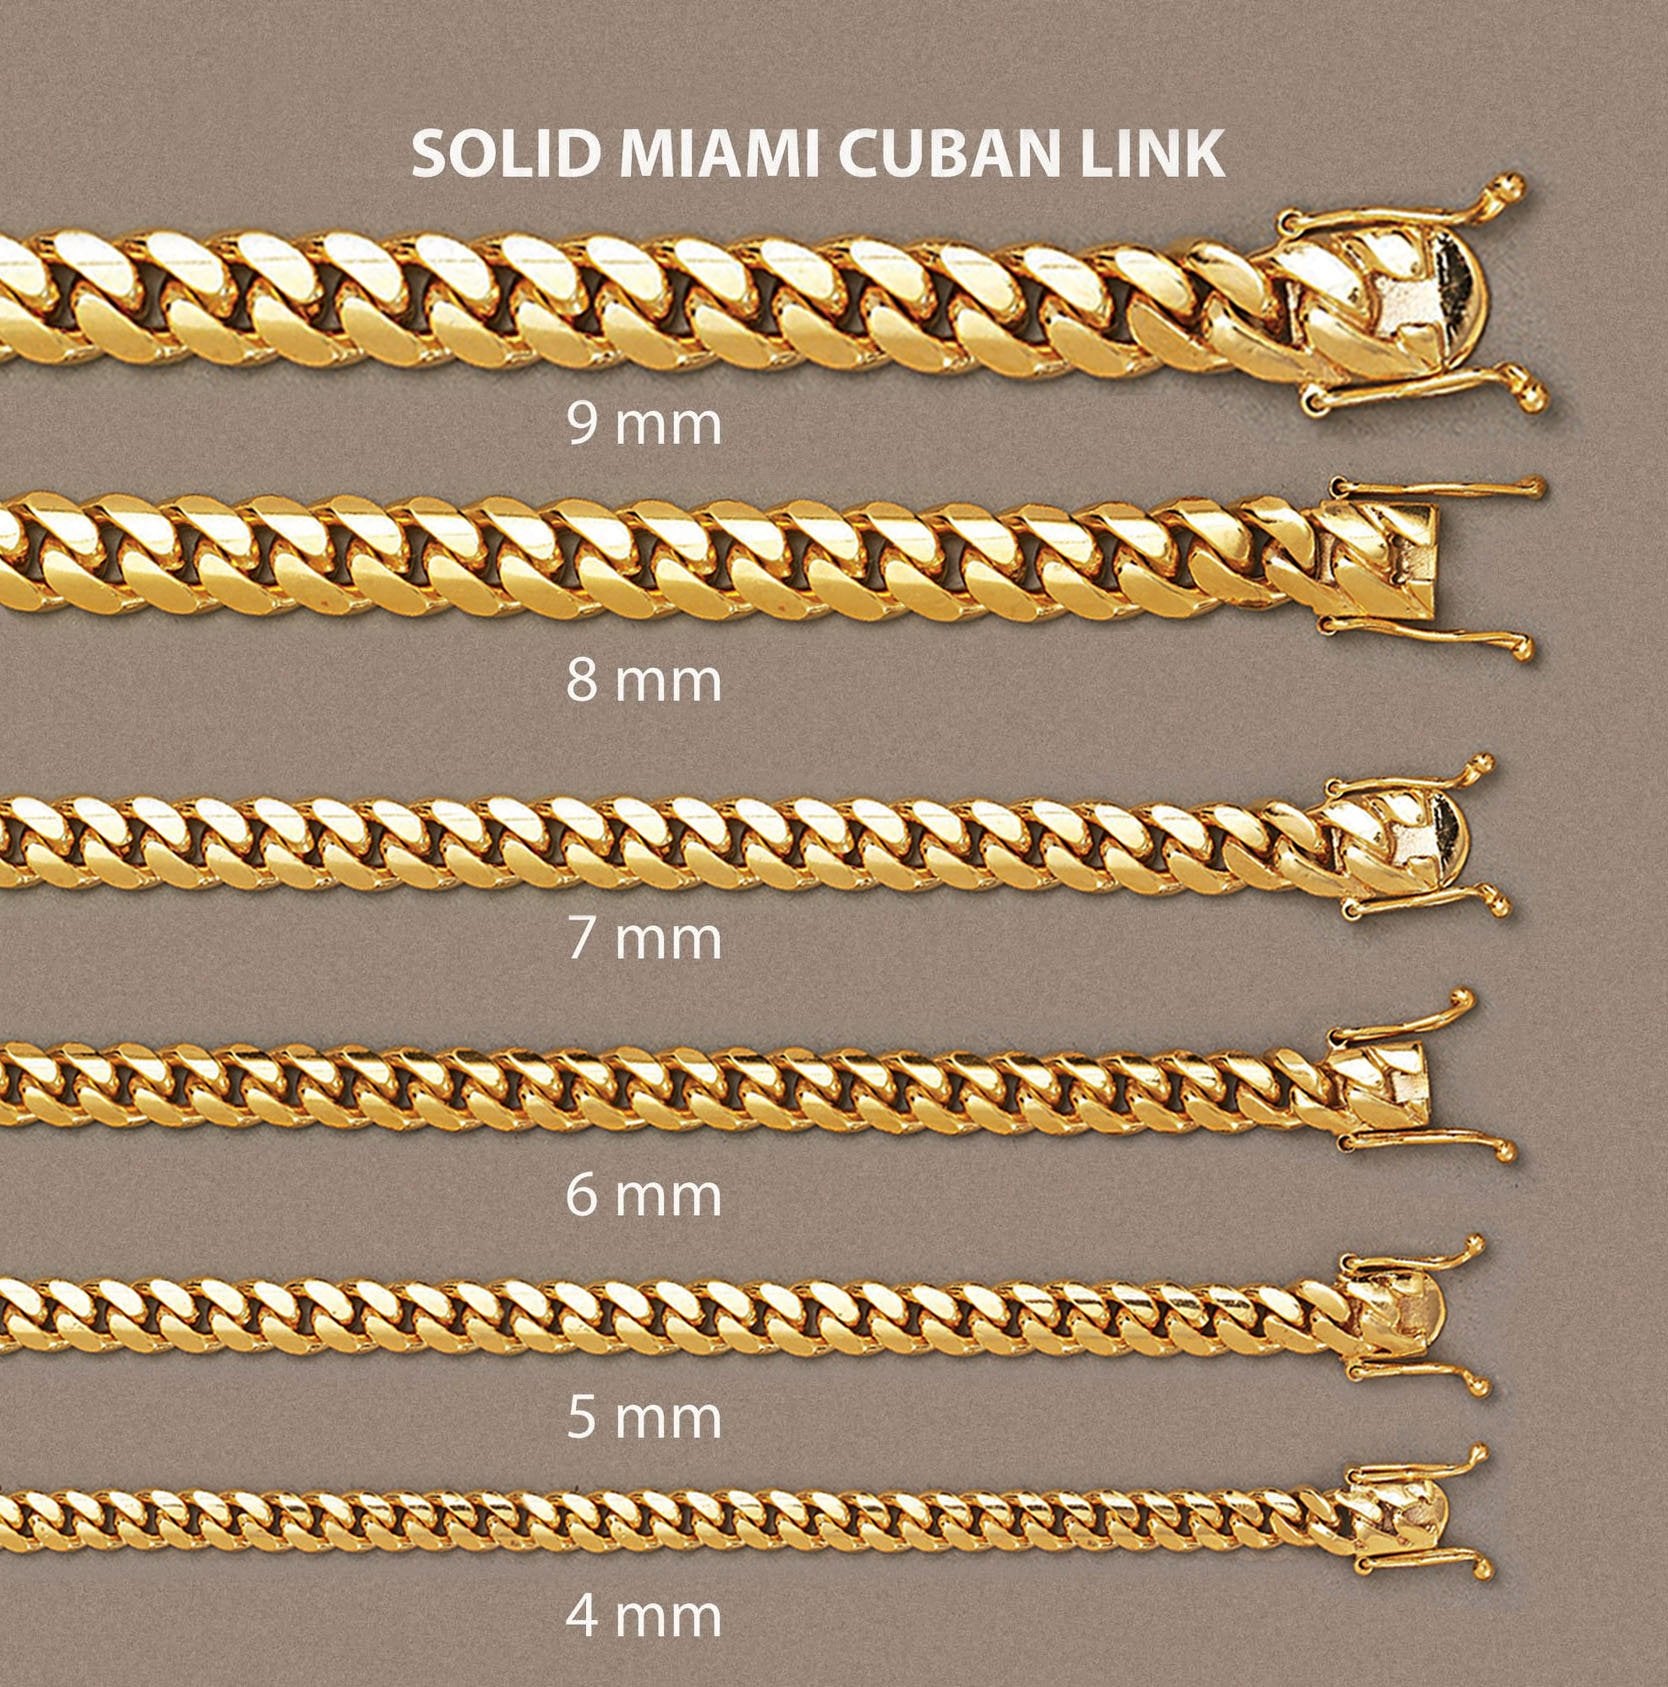 RARE PRINCE by CARAT SUTRA  12mm Wide Solid Miami Cuban Link Bracelet   caratsutra